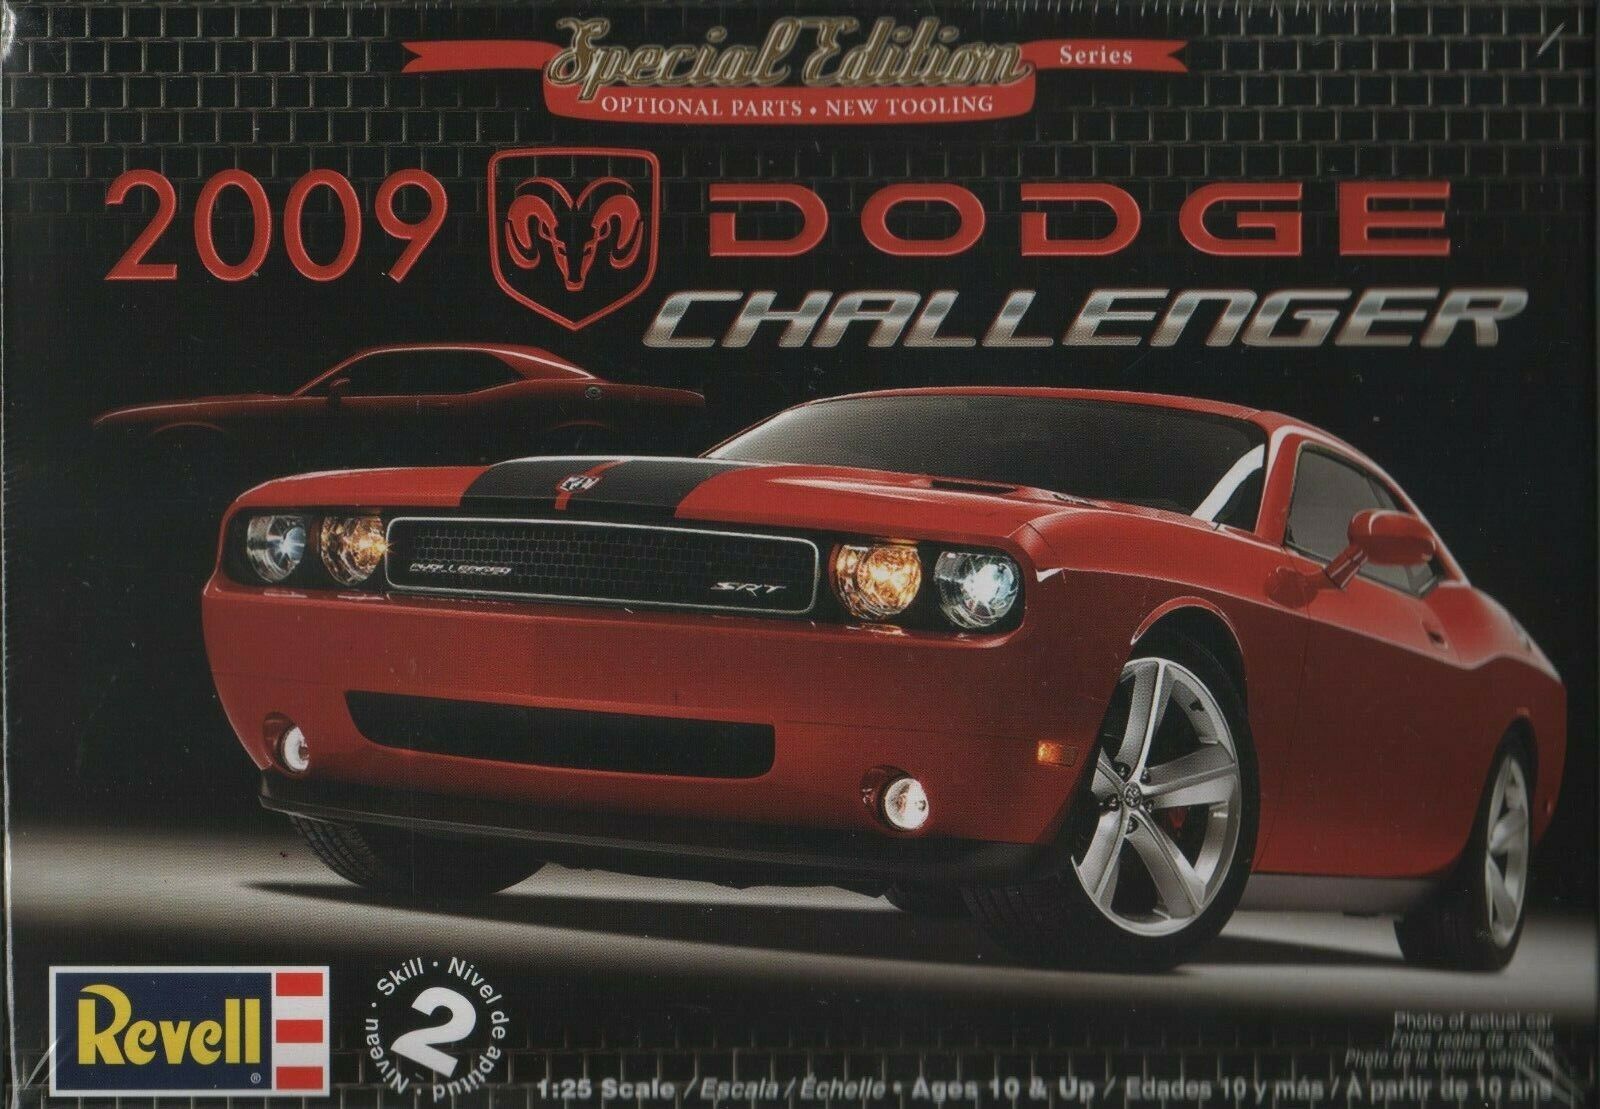 REVELL SPECIAL EDITION 2009 DODGE CHALLENGER MODEL KIT FACTORY SEALED